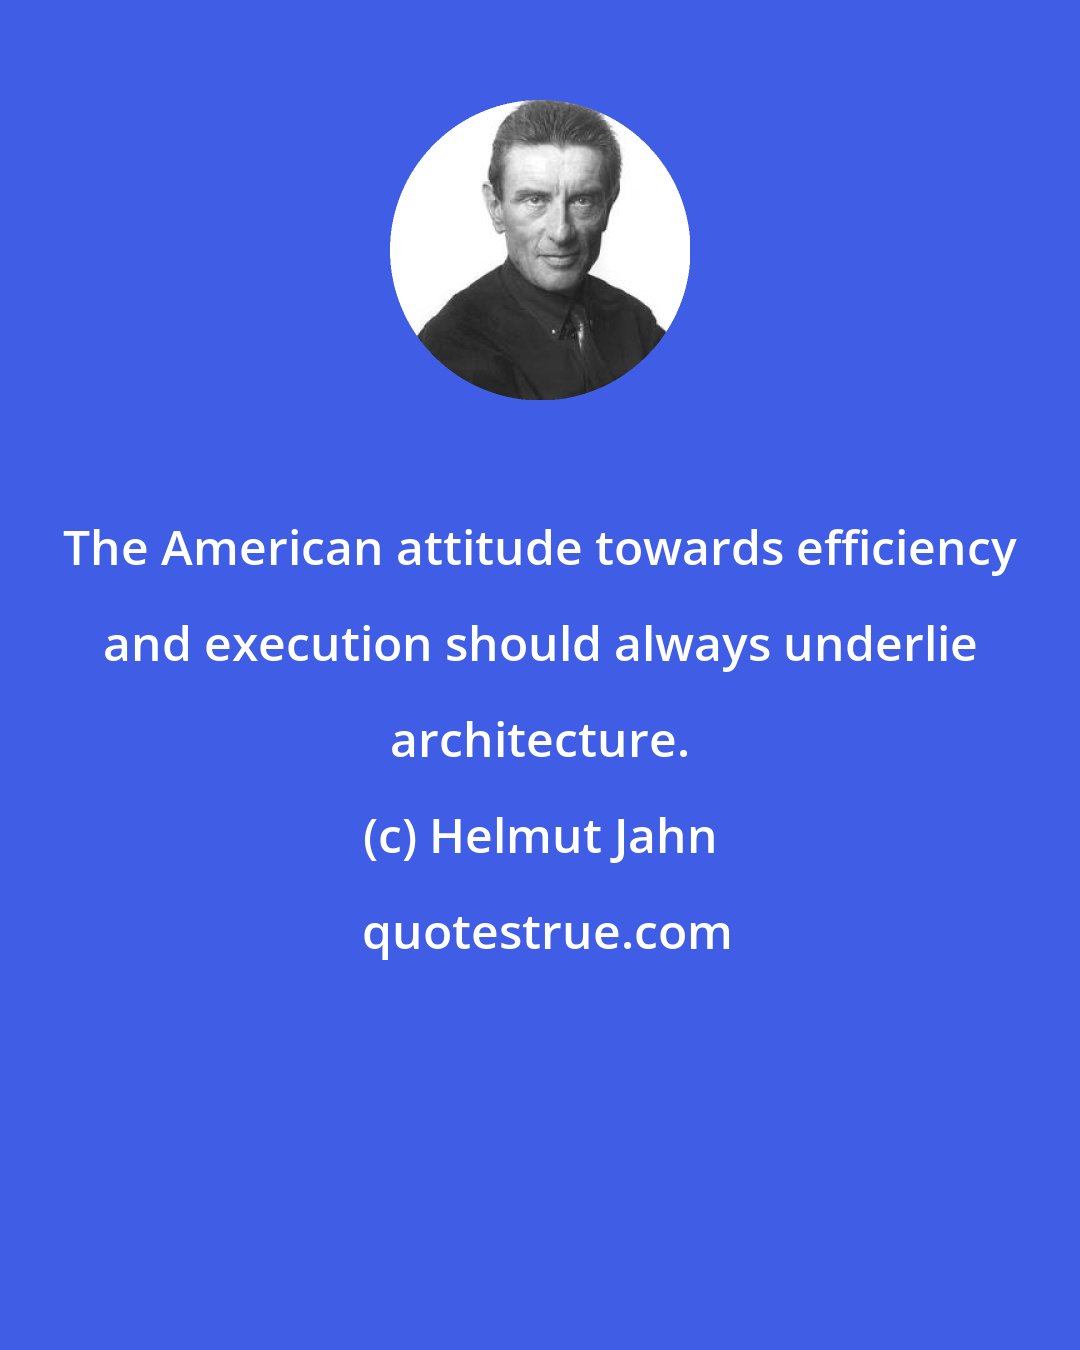 Helmut Jahn: The American attitude towards efficiency and execution should always underlie architecture.